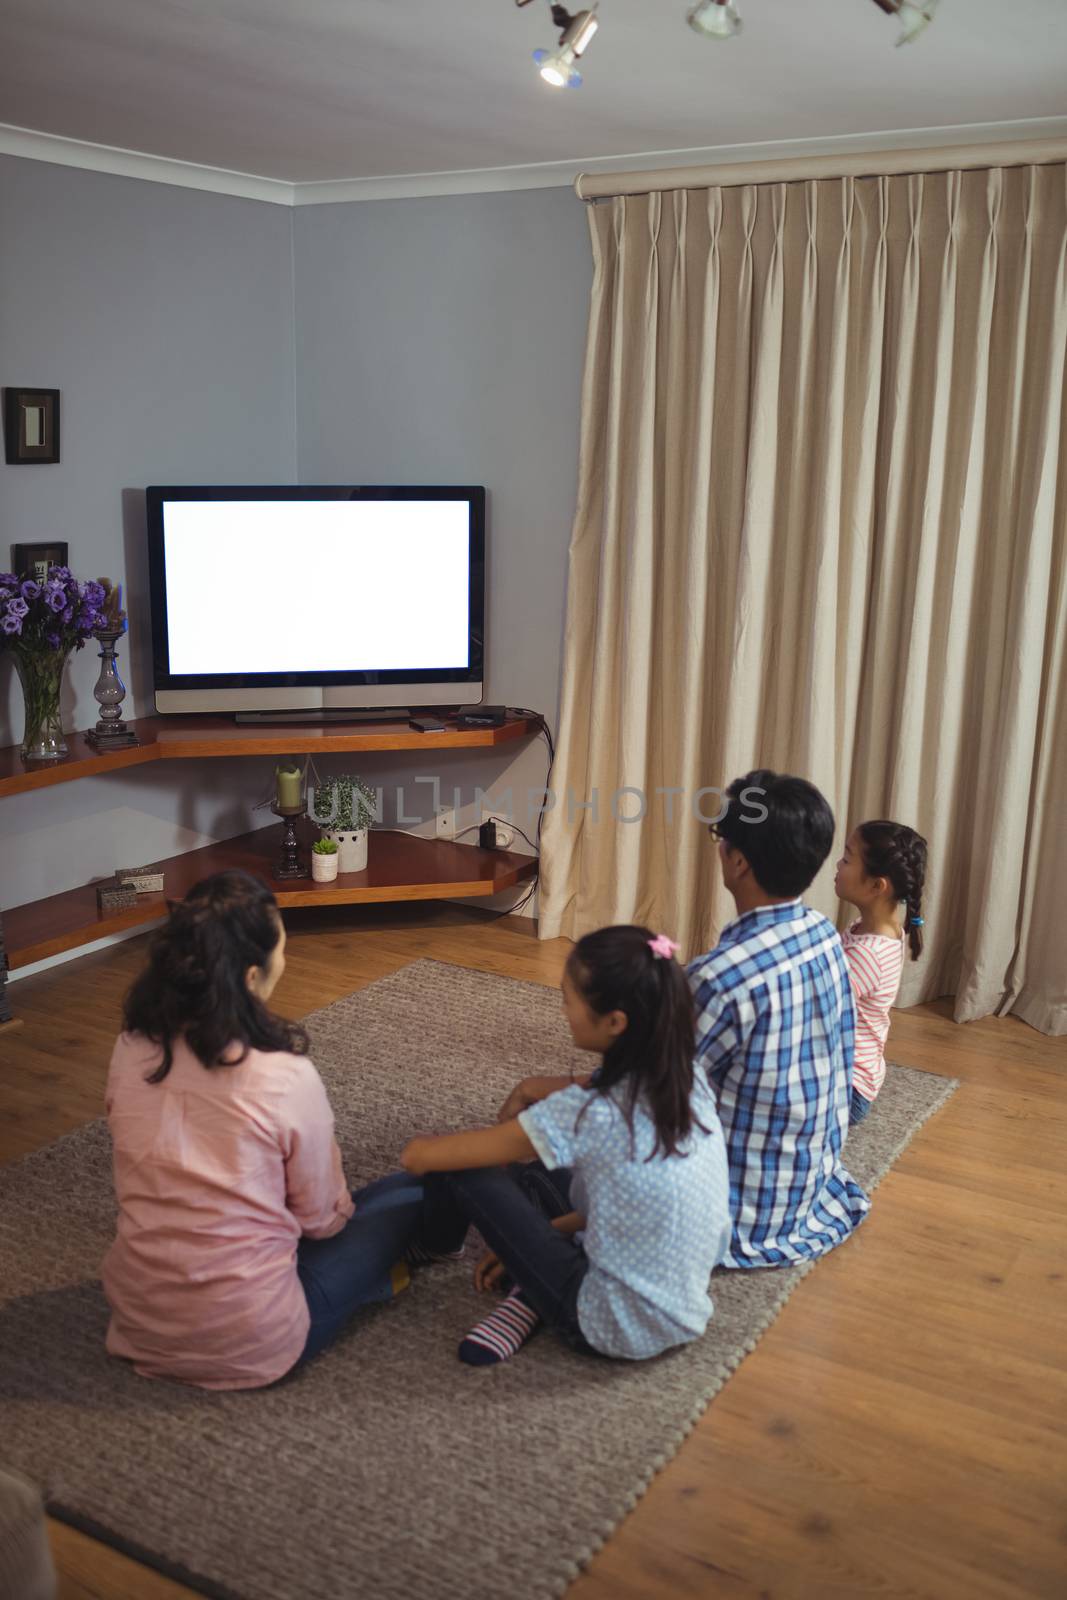 Family watching television together in living room at home